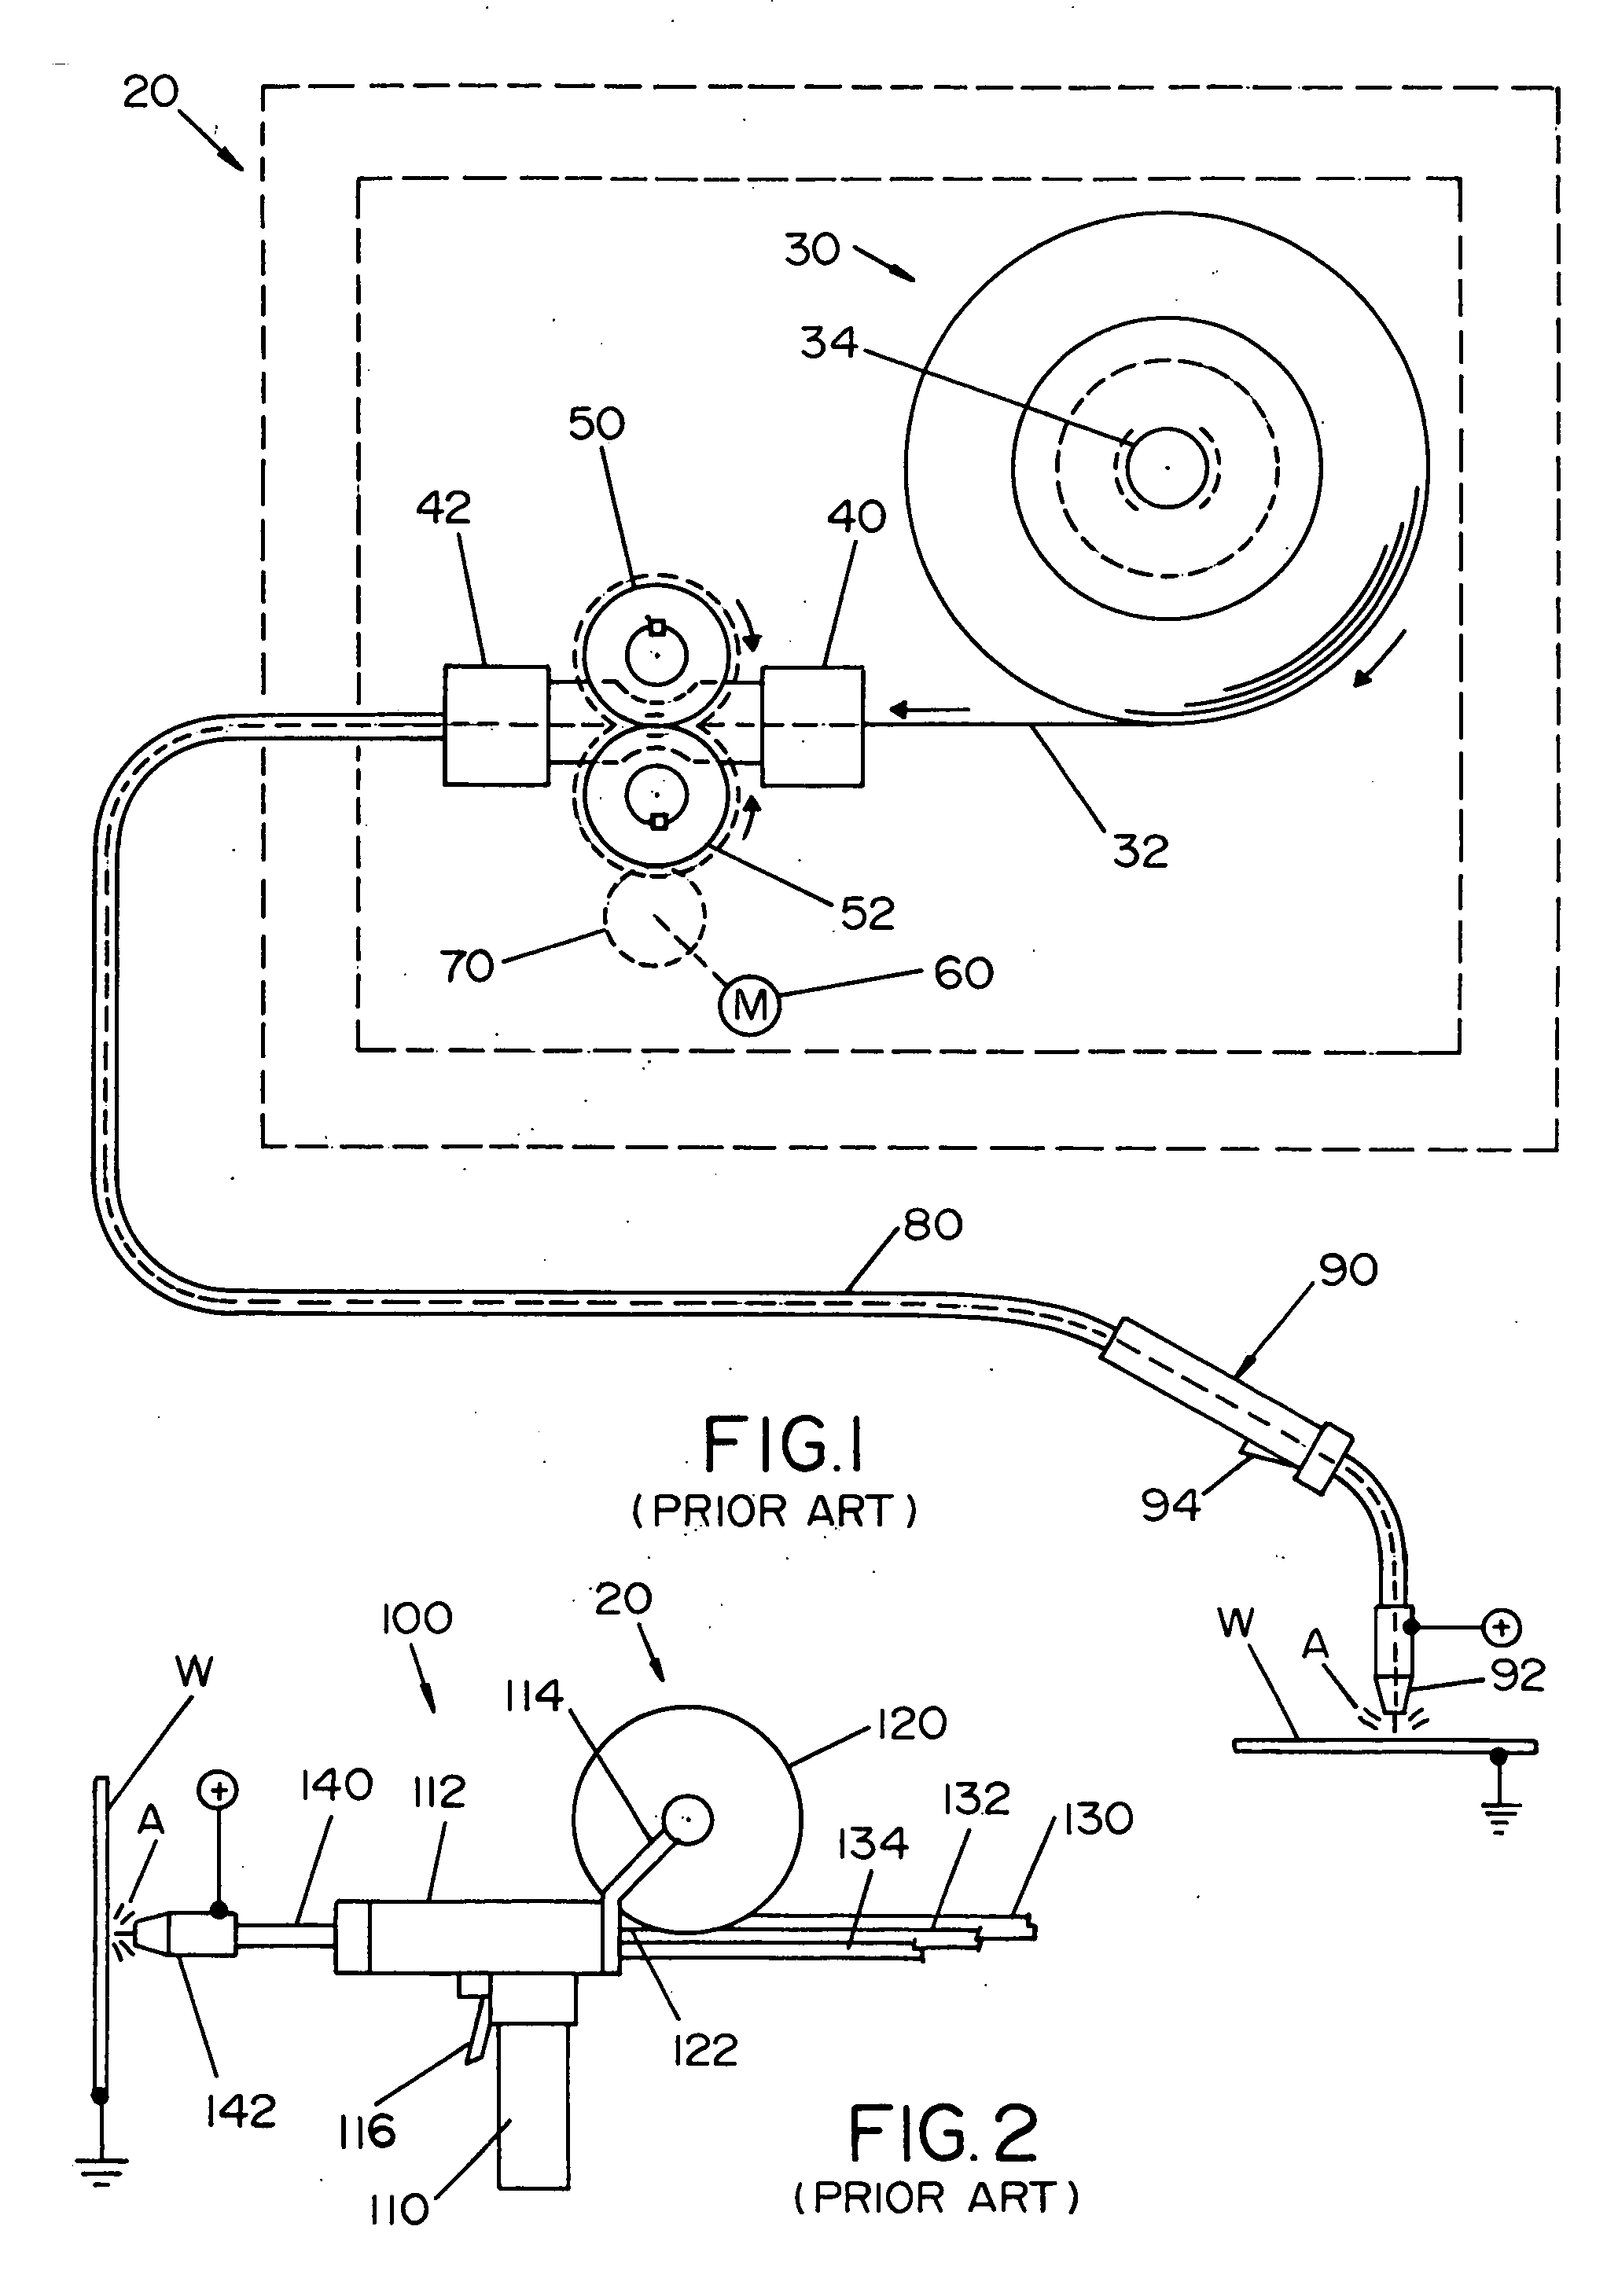 Interchangeable wire drive for wire feeder and spool gun